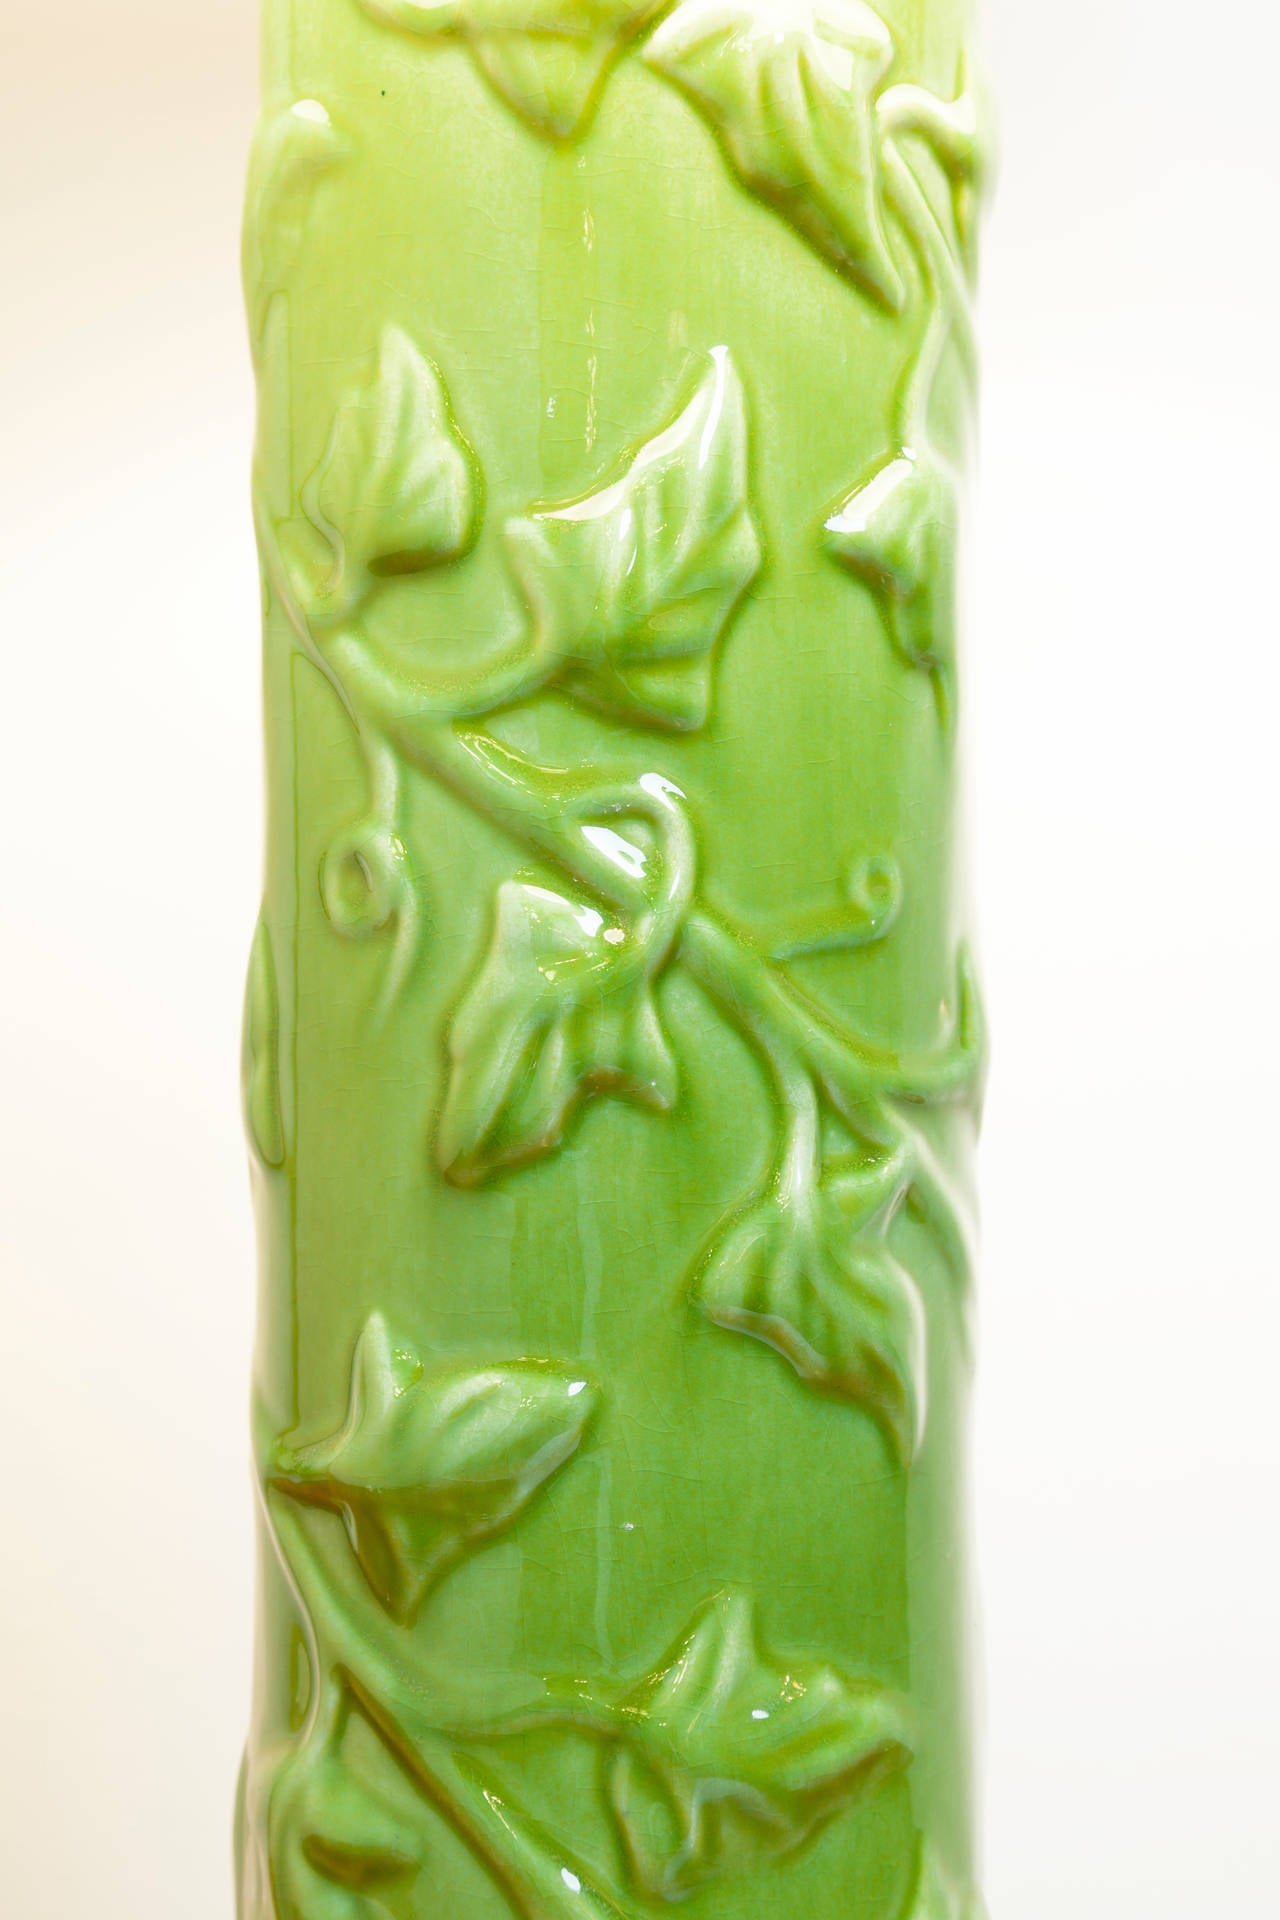 Art Pottery lamp with beautiful lime green glaze and raised vine design, circa 1930s. Overall dimensions including shade: 12 inches wide x 24 inches high.